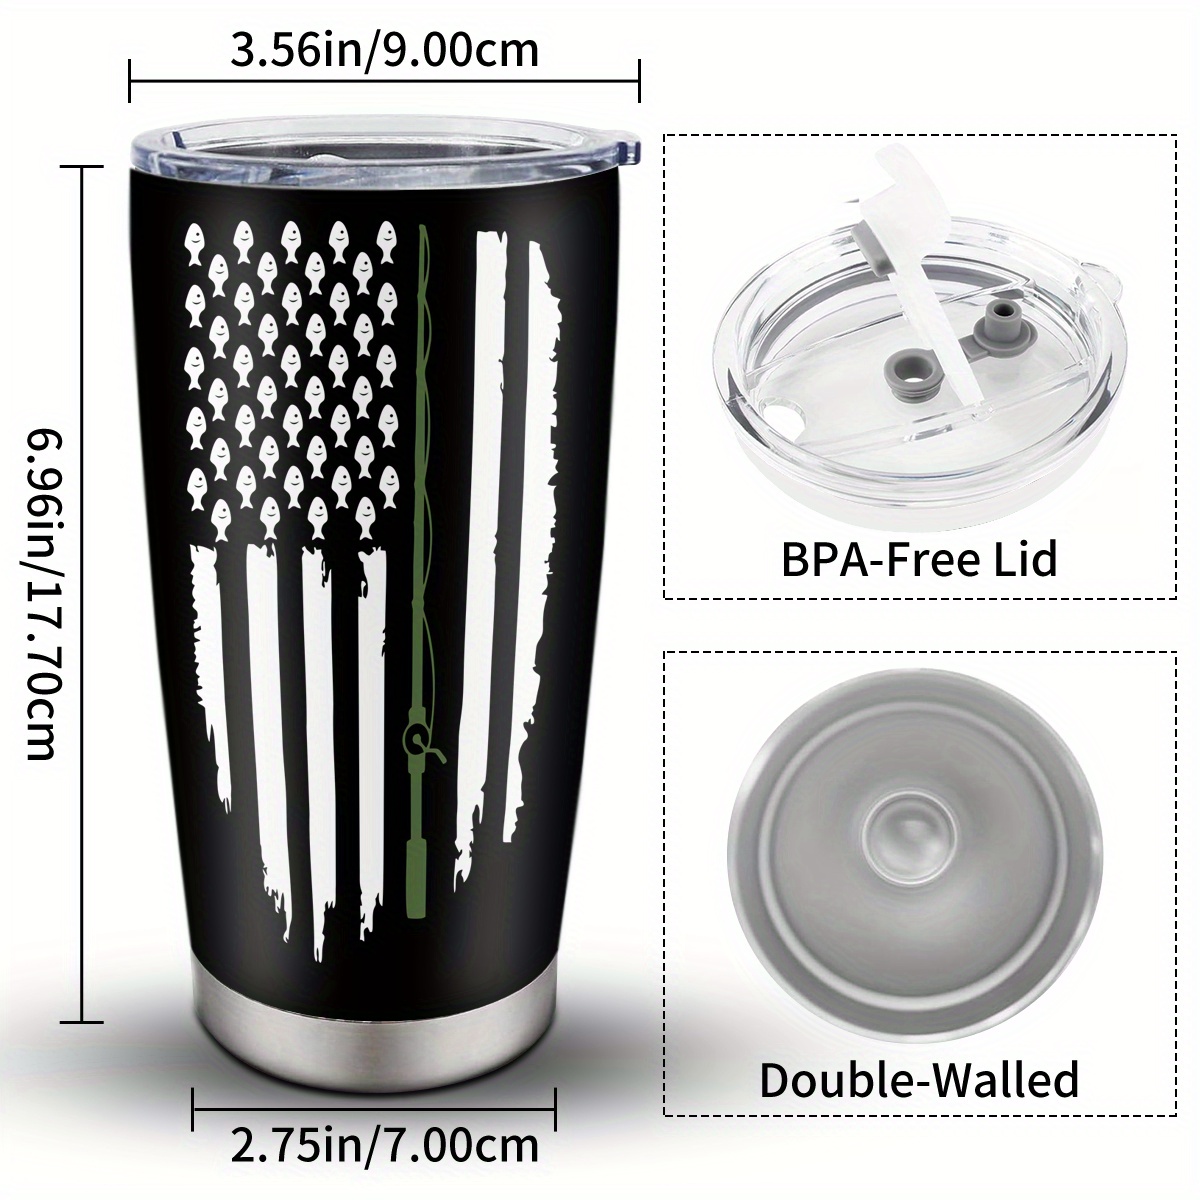 1pc Fishermen Gifts, Funny Fishing Tumbler With Lid, 20 Oz Stainless Steel  Coffee Mug For Men, American Flag Themed Cup, Easter Fishing Gifts Husband